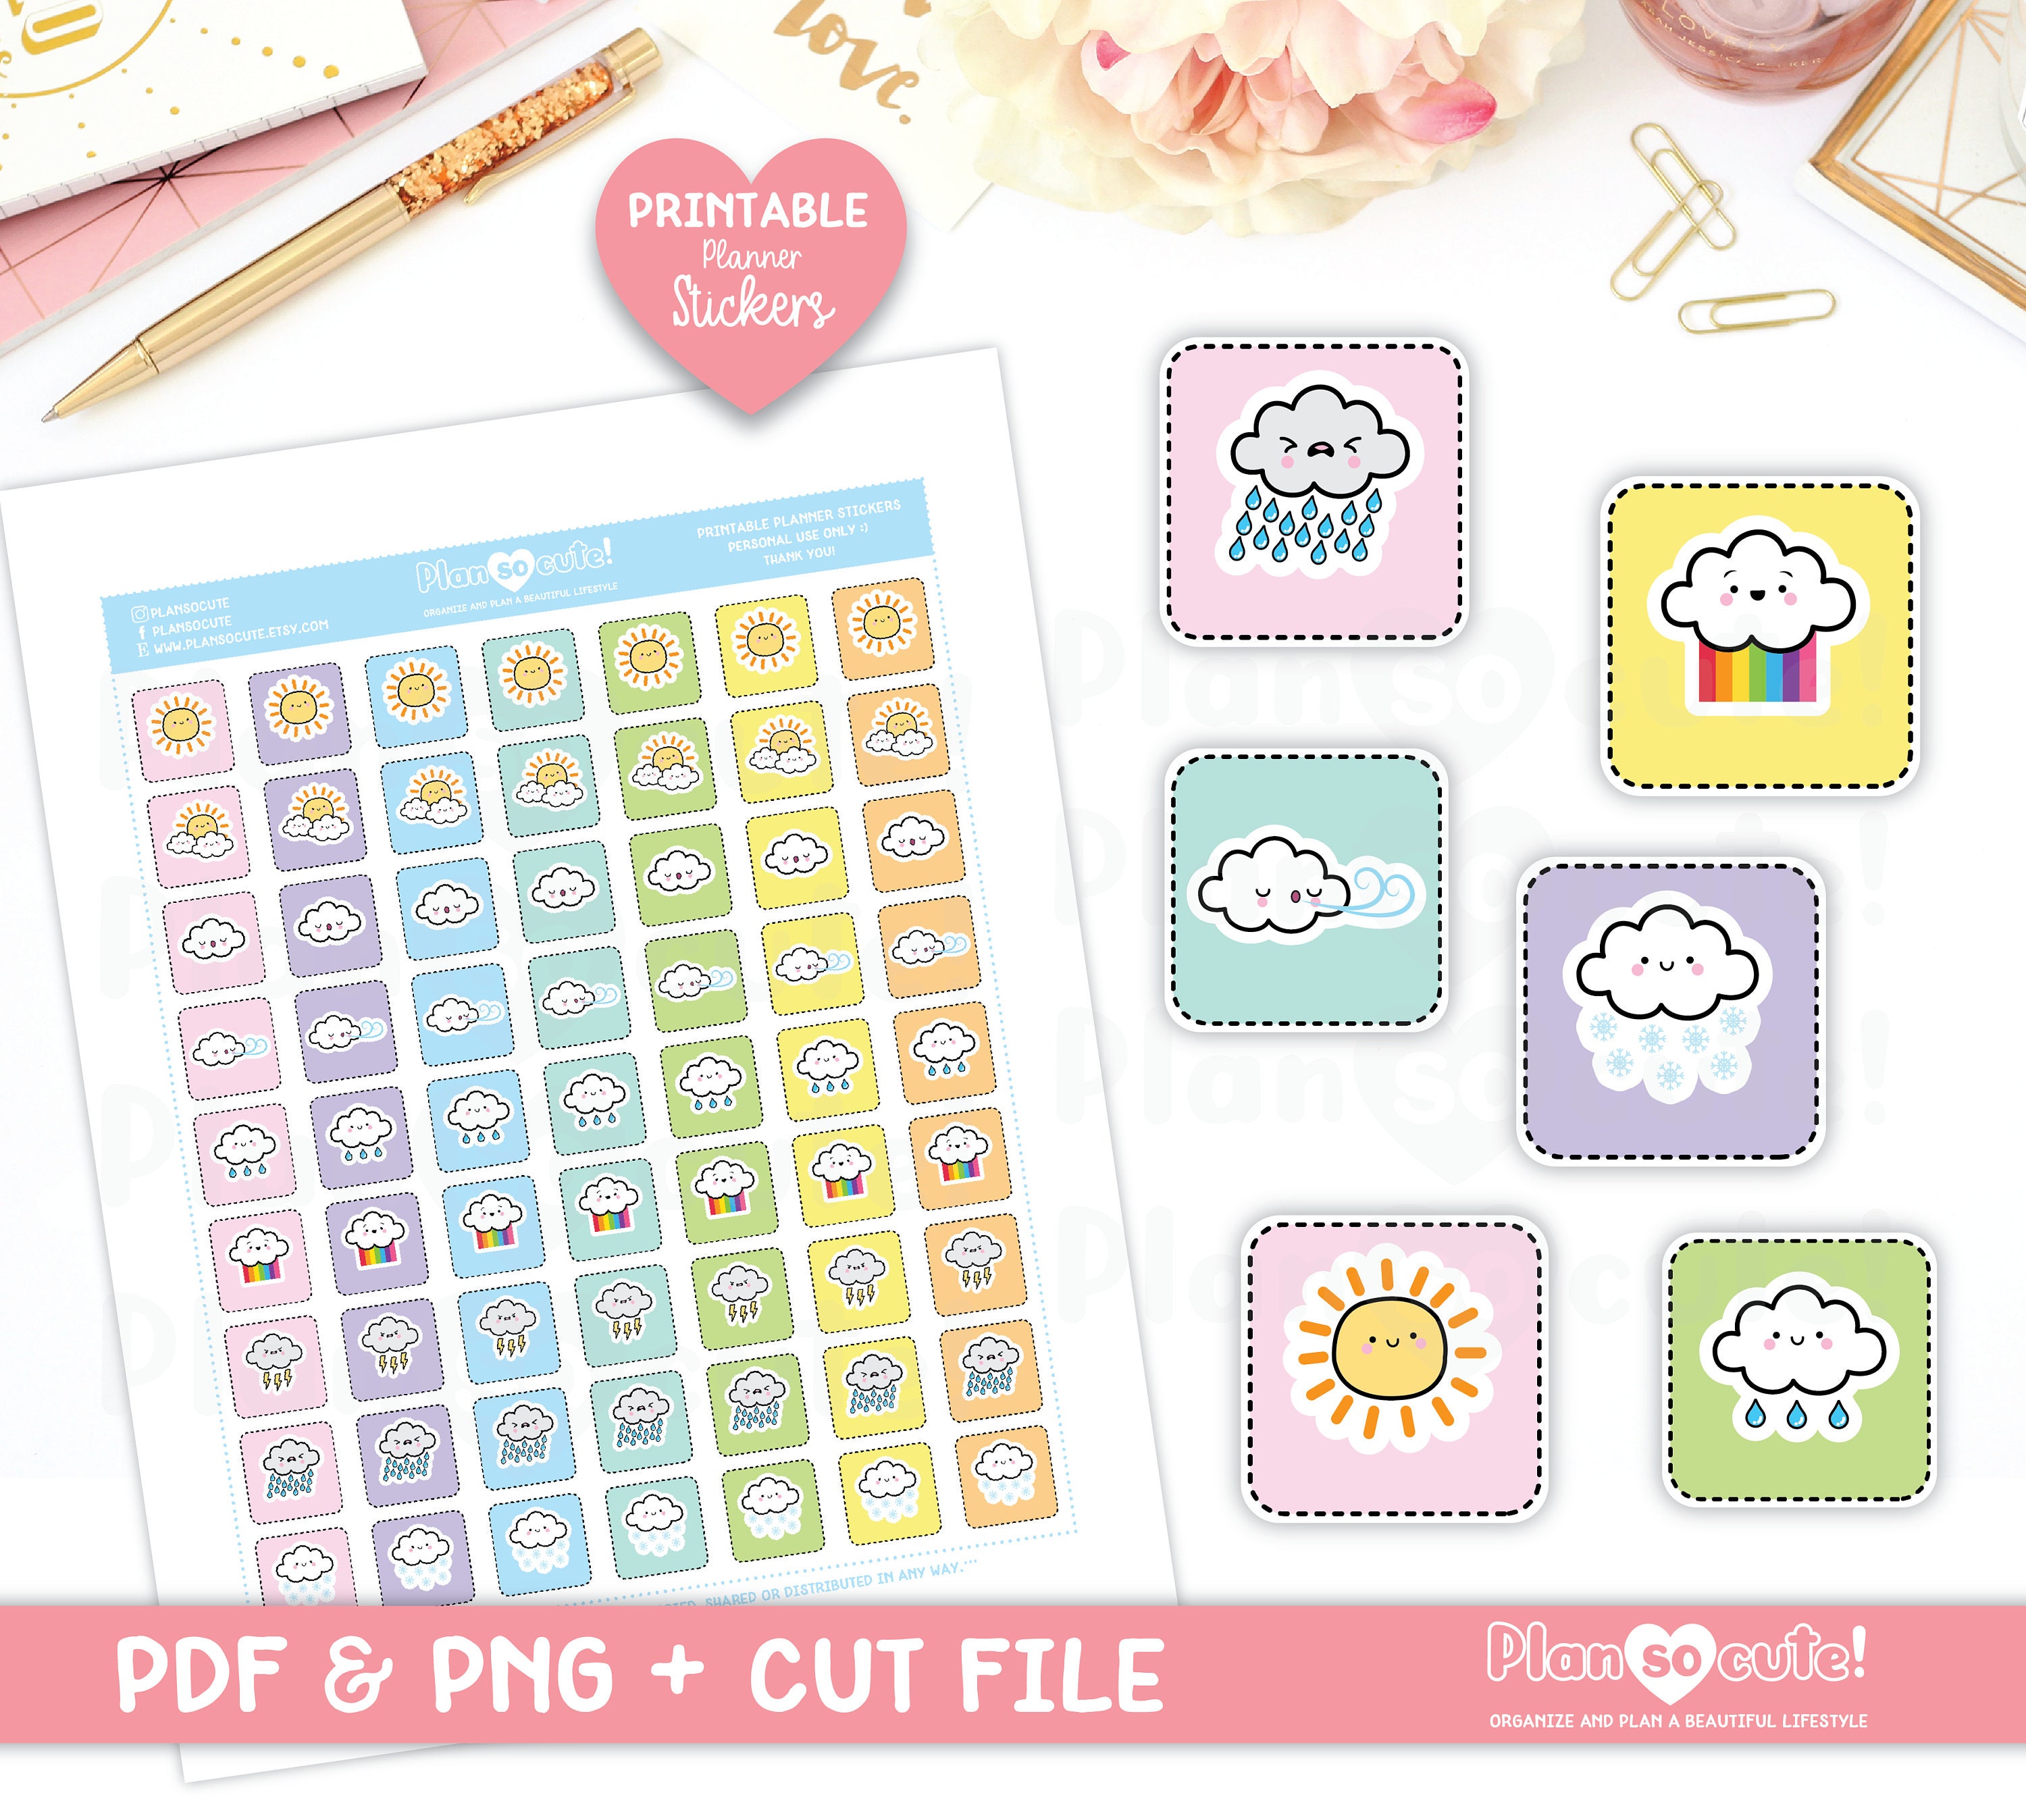 paper-party-kids-printable-planner-kawaii-go-shopping-stickers